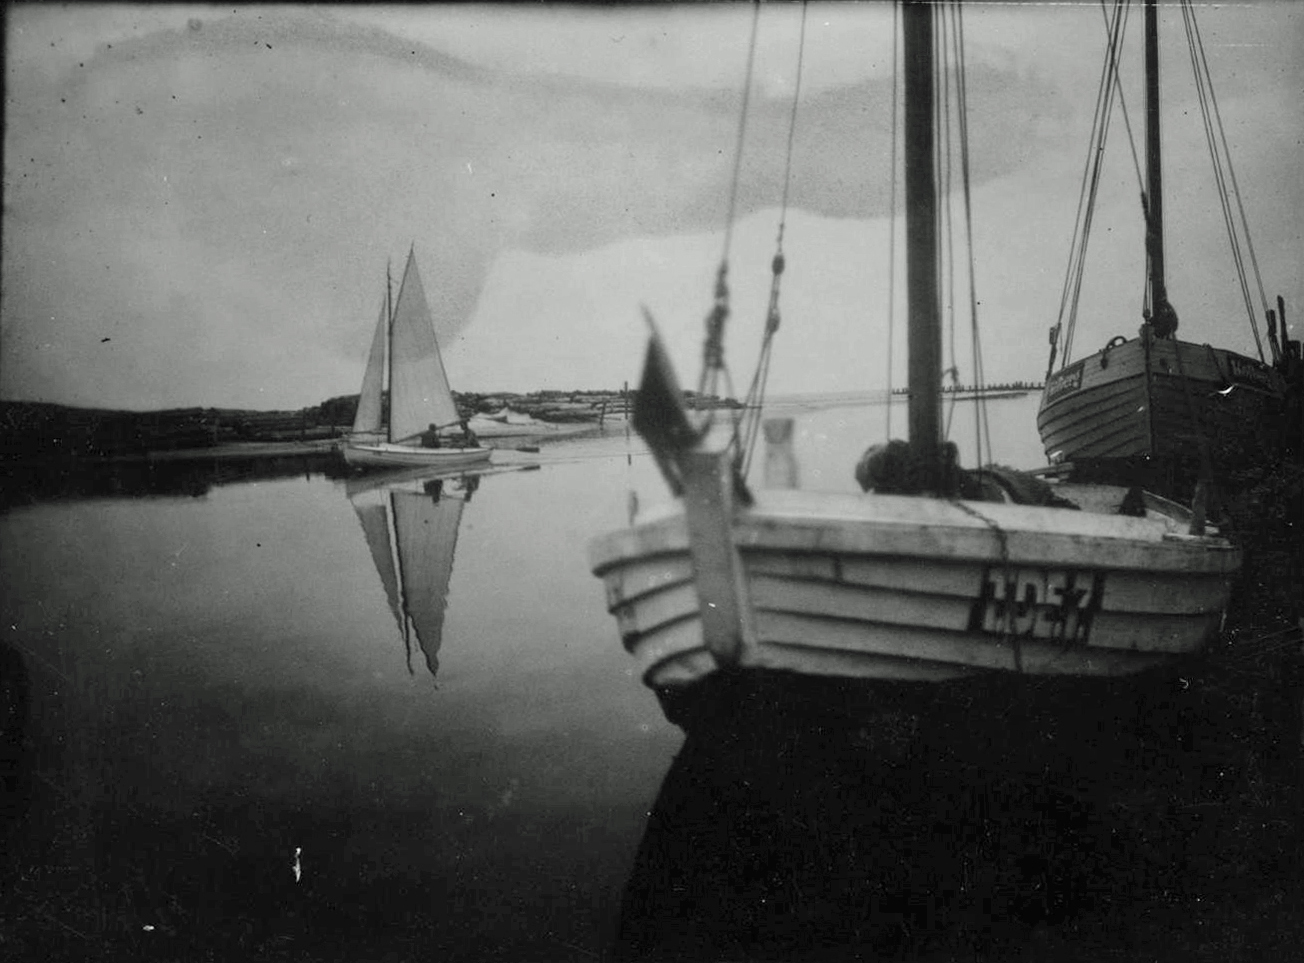 Sailboats in the Rega Estuary, in the foreground the T.DE.7.